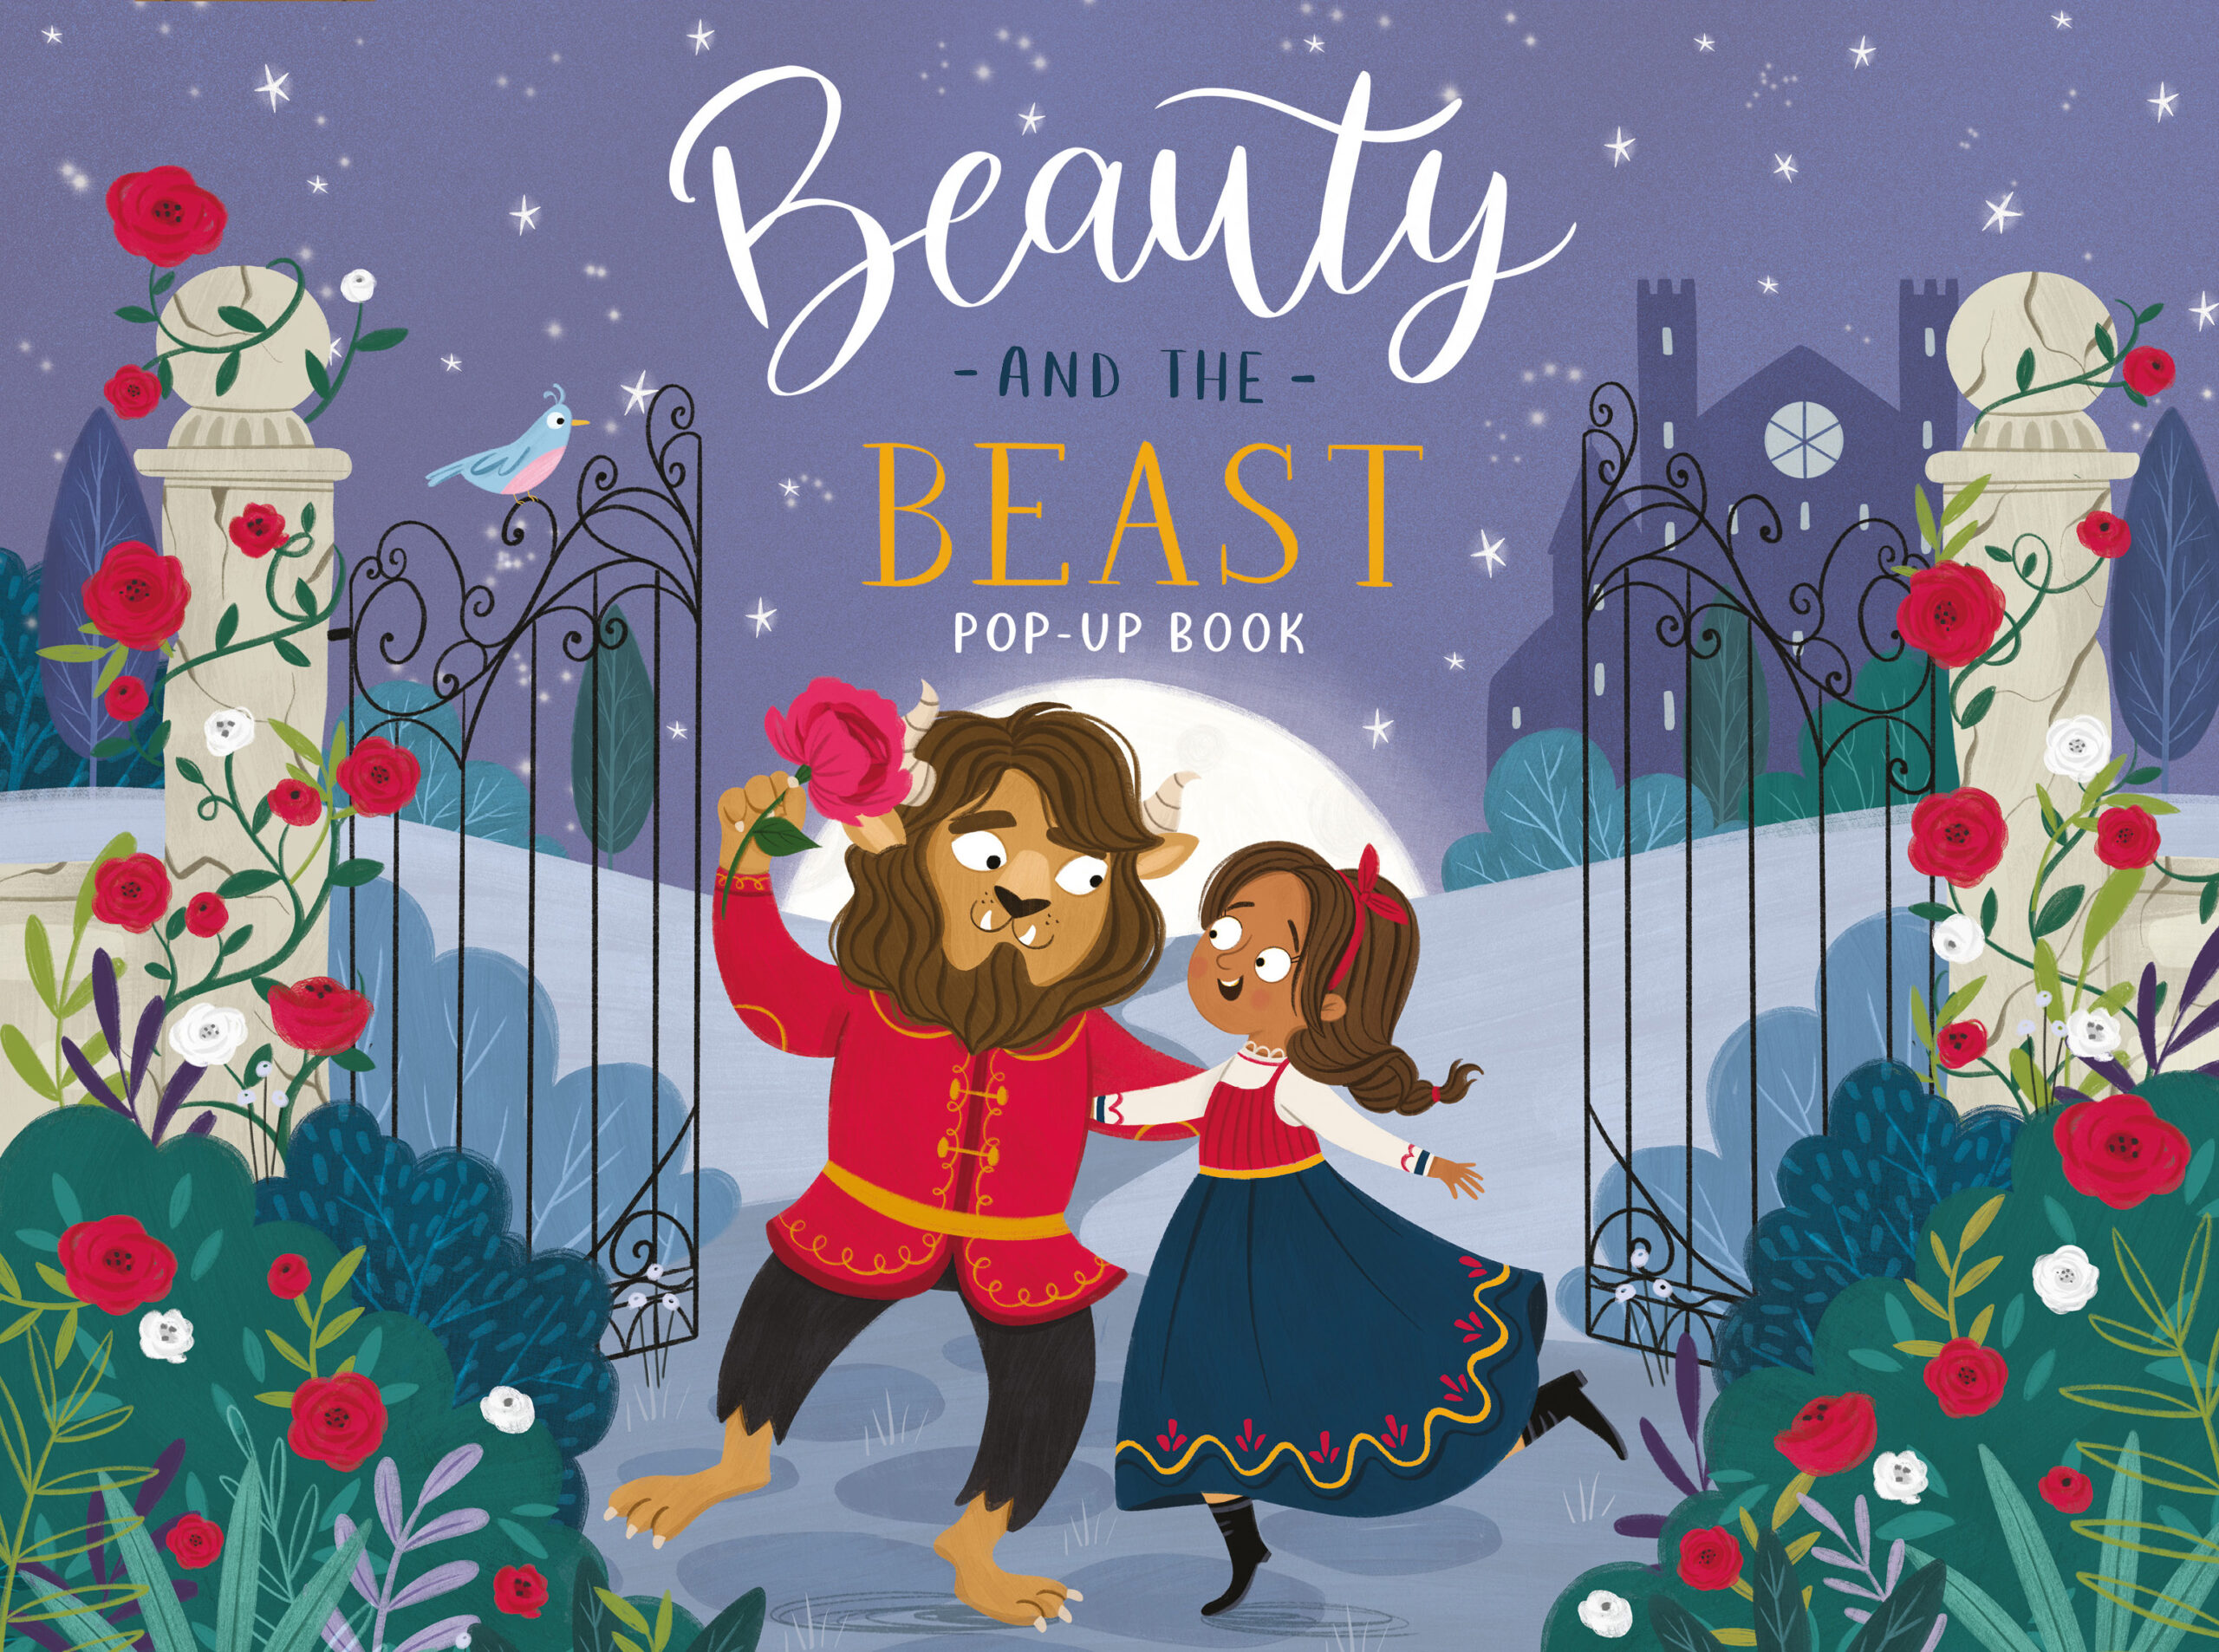 Beauty and the Beast Pop-up Book